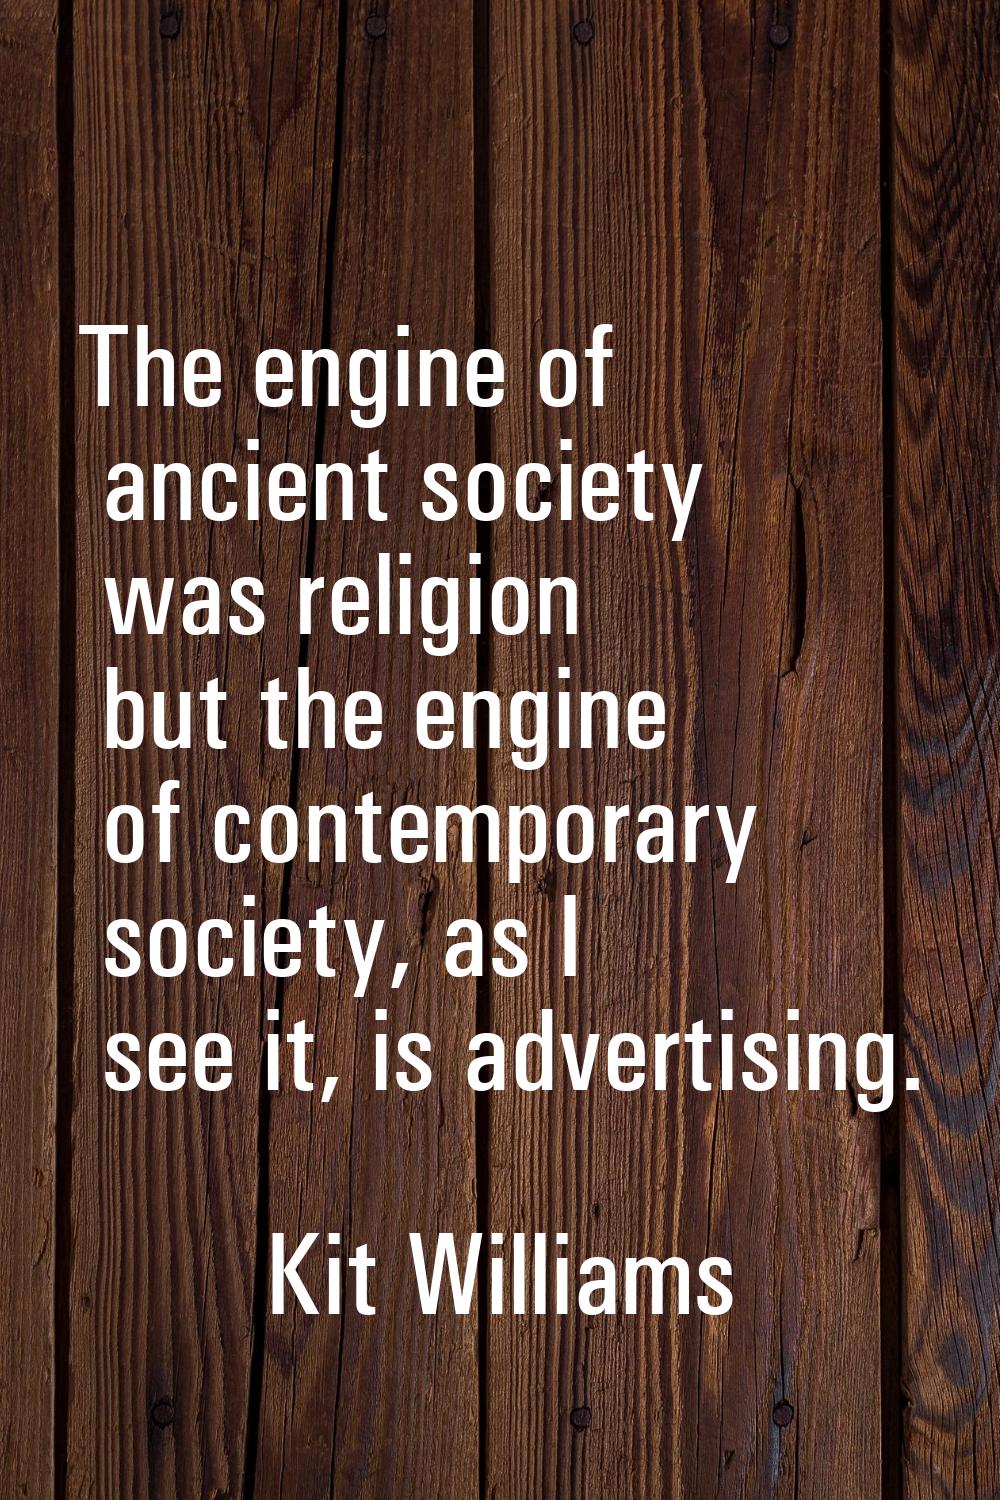 The engine of ancient society was religion but the engine of contemporary society, as I see it, is 